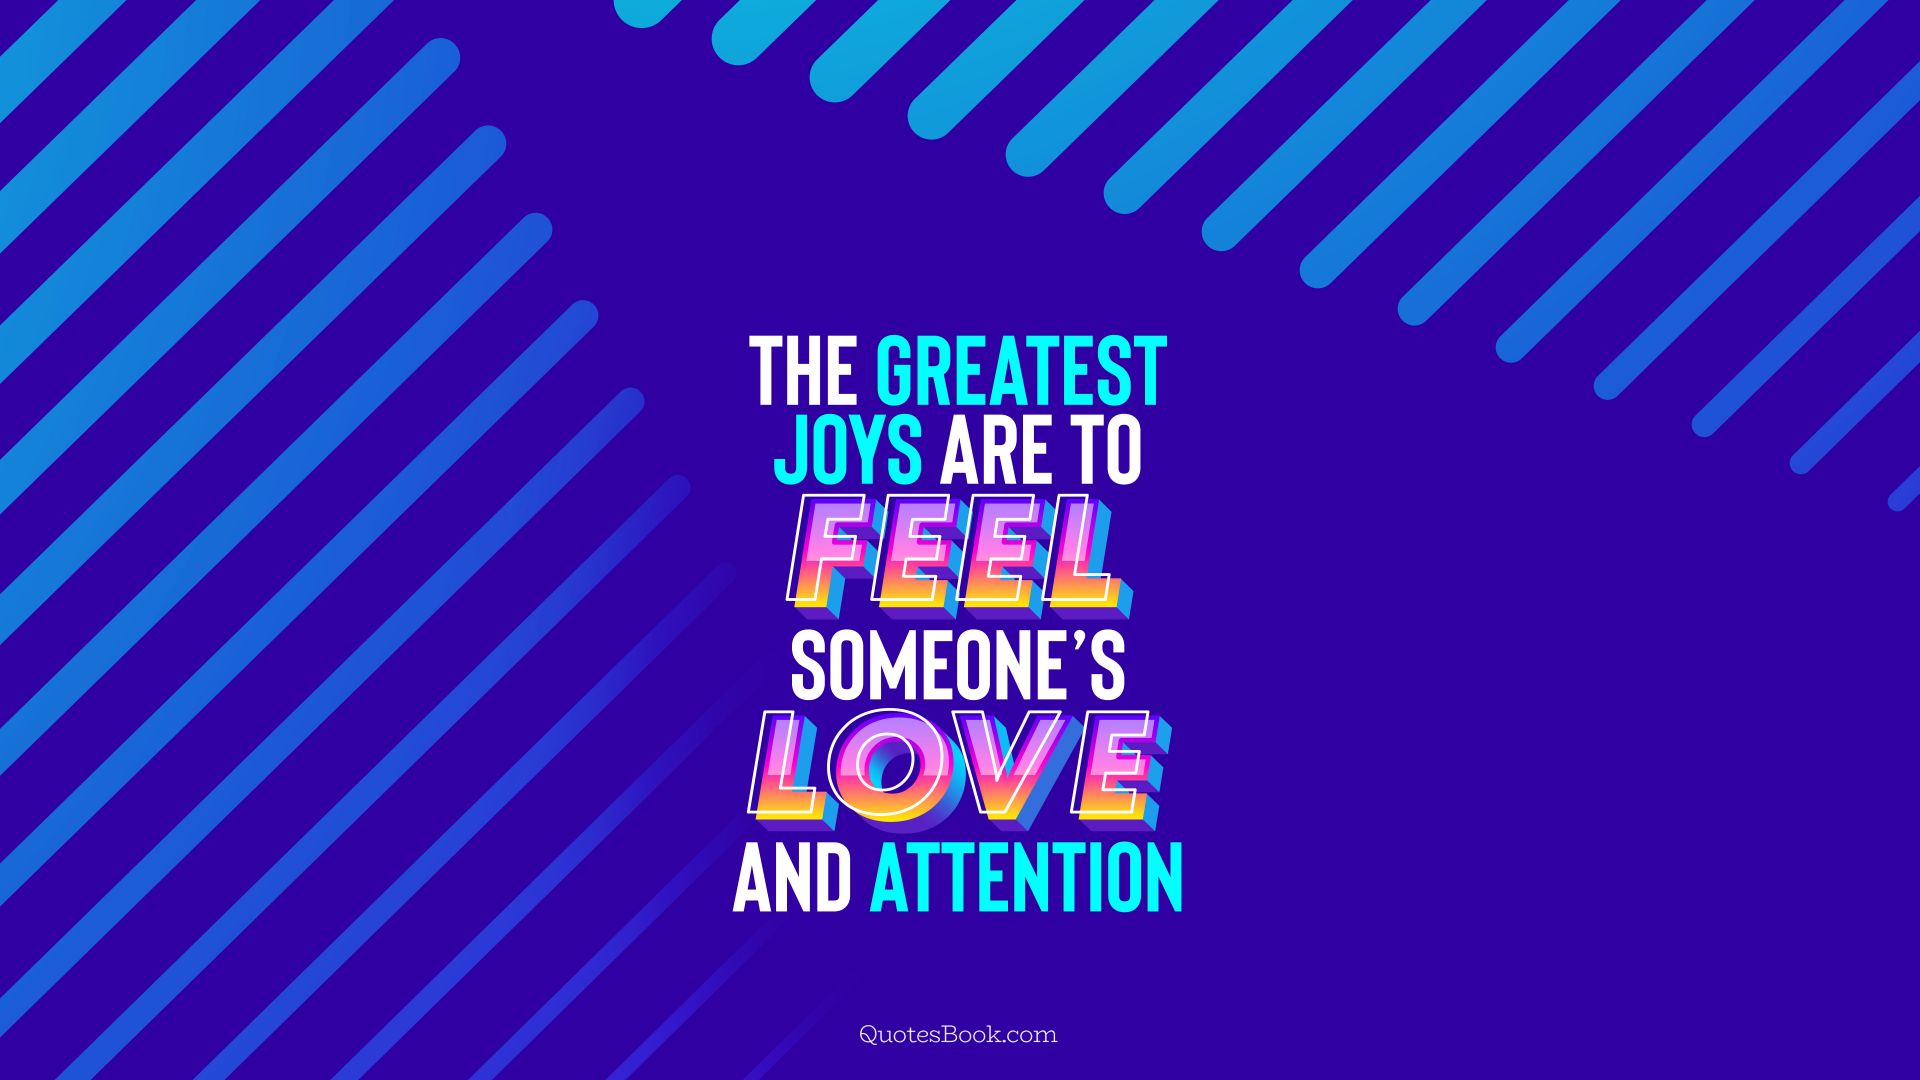 The greatest joys are to feel someone’s love and attention. - Quote by QuotesBook